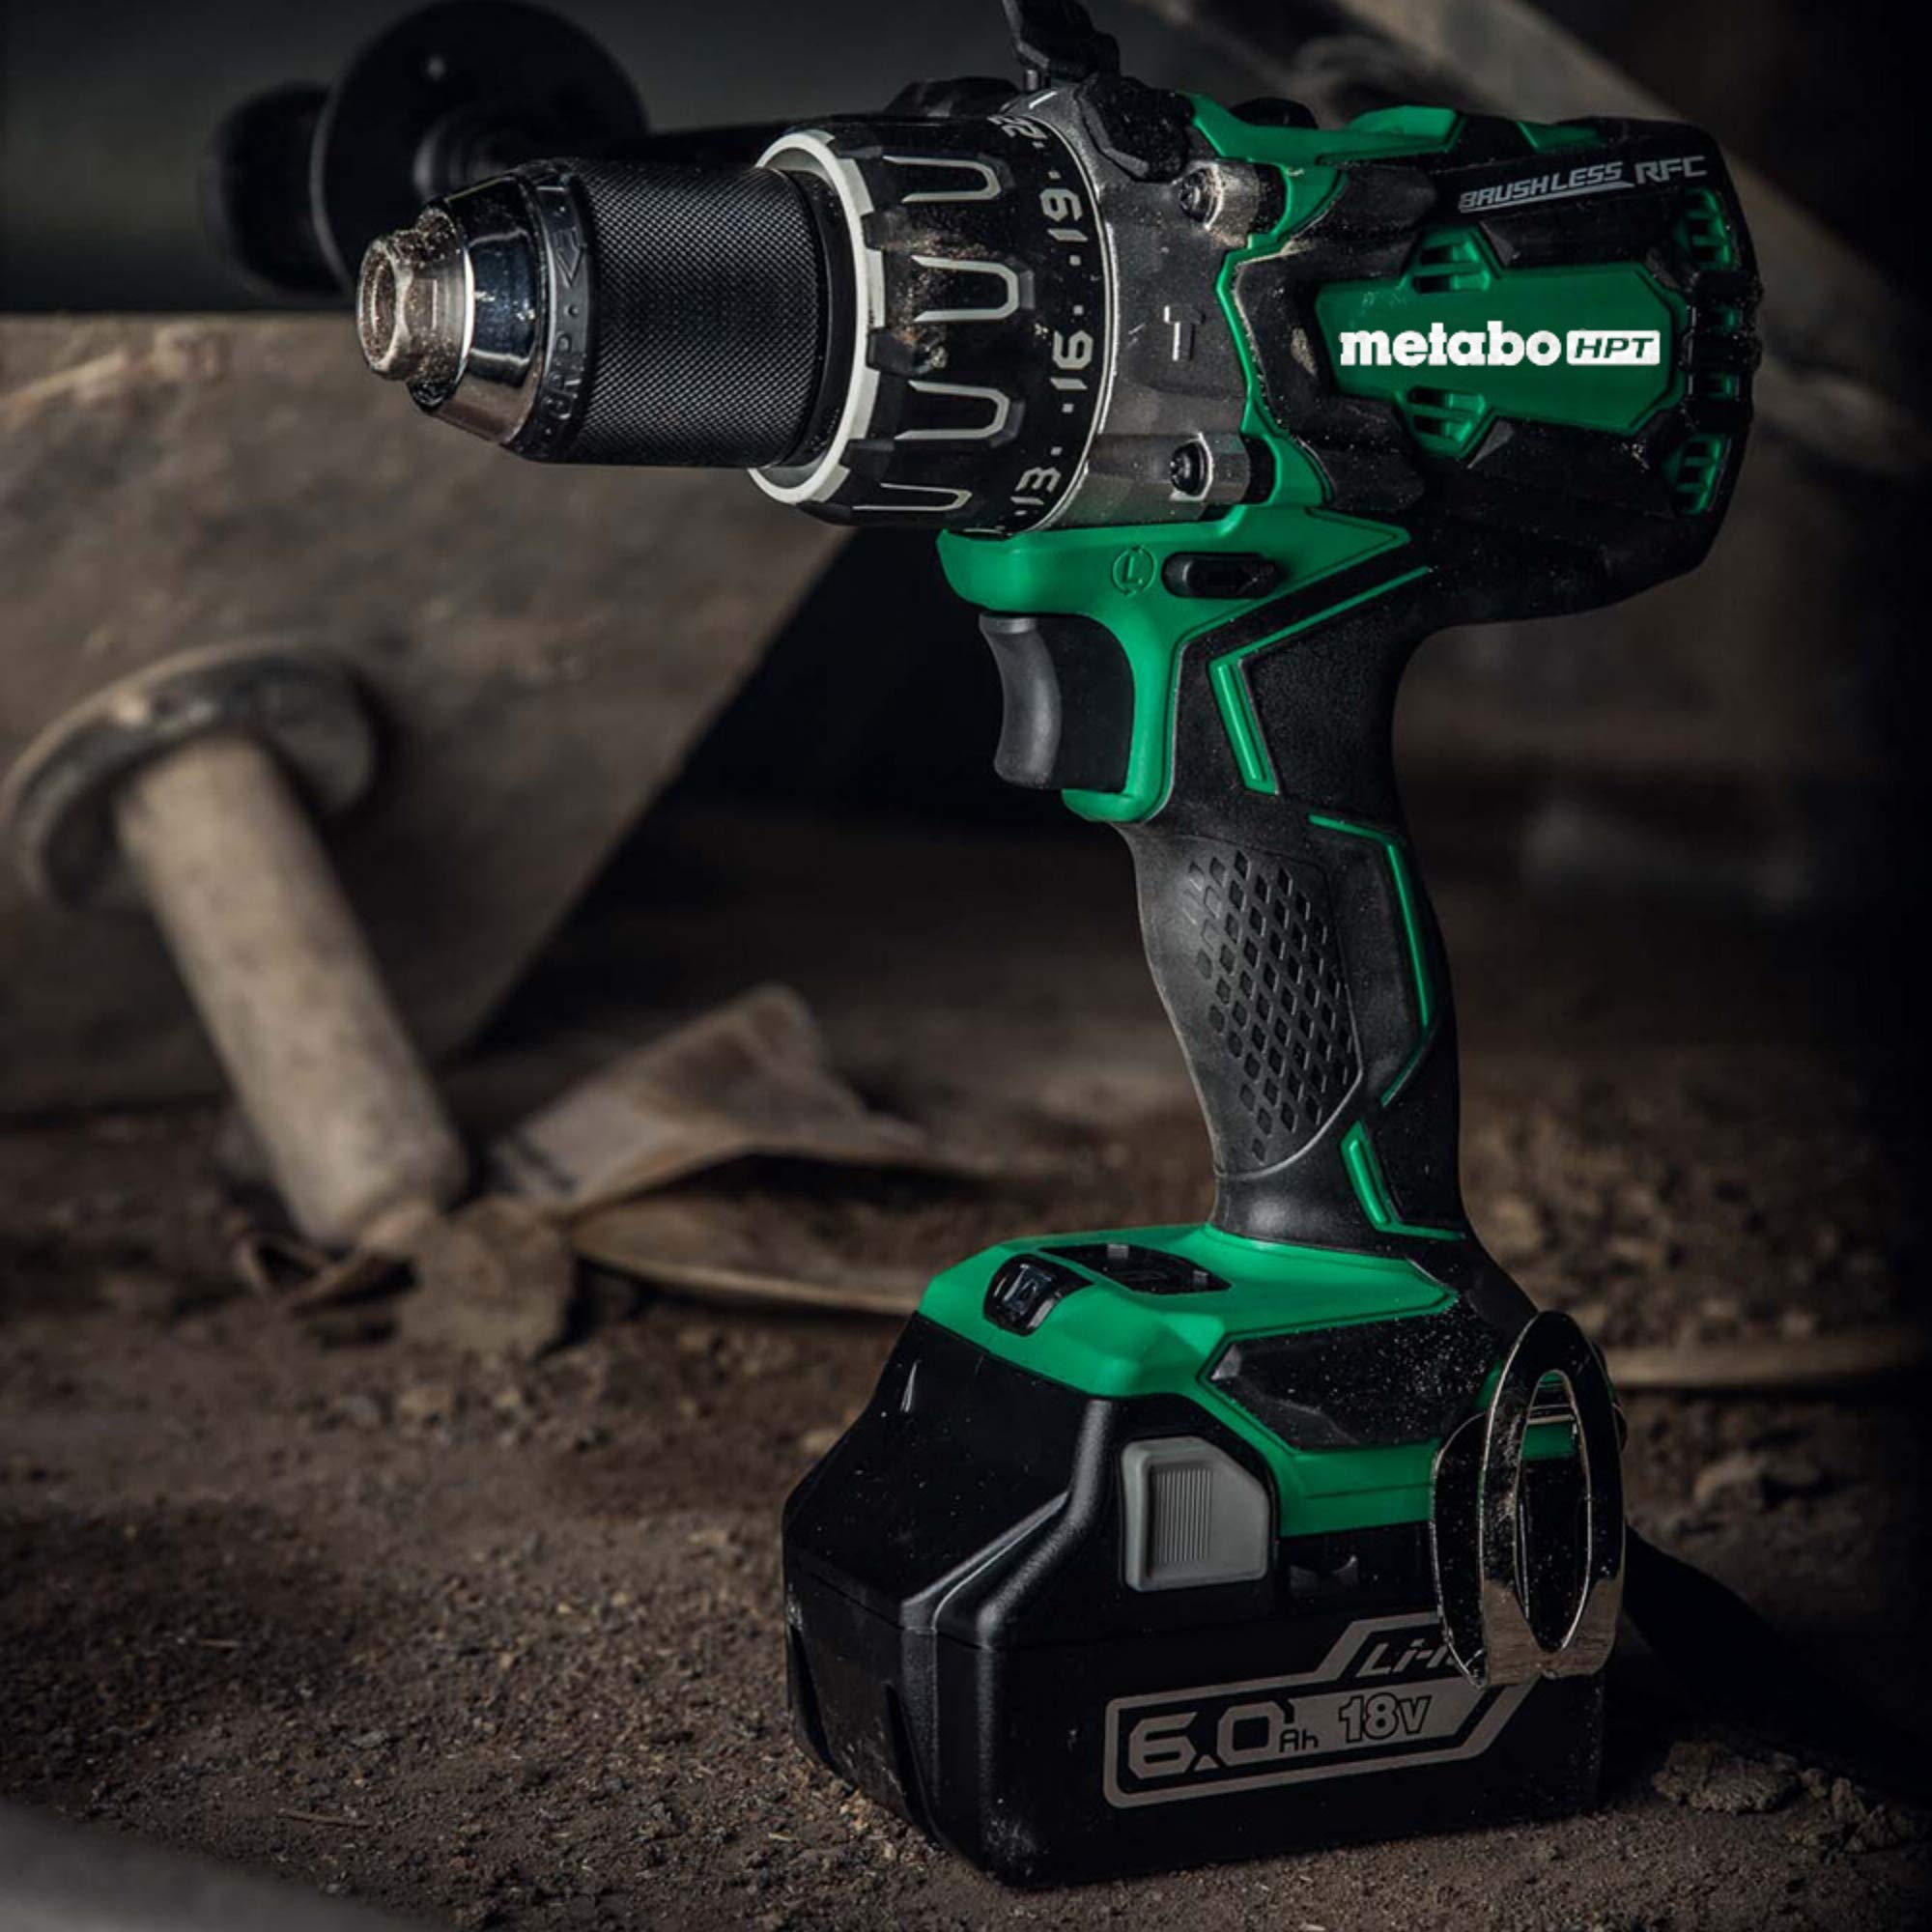 Metabo HPT 18V Cordless Brushless Hammer Drill, Tool Only - No Battery, Compatible with Hitachi/Metabo HPT 18V Lithium Ion Slide-Type Batteries, Lifetime Tool Warranty (DV18DBL2Q4)